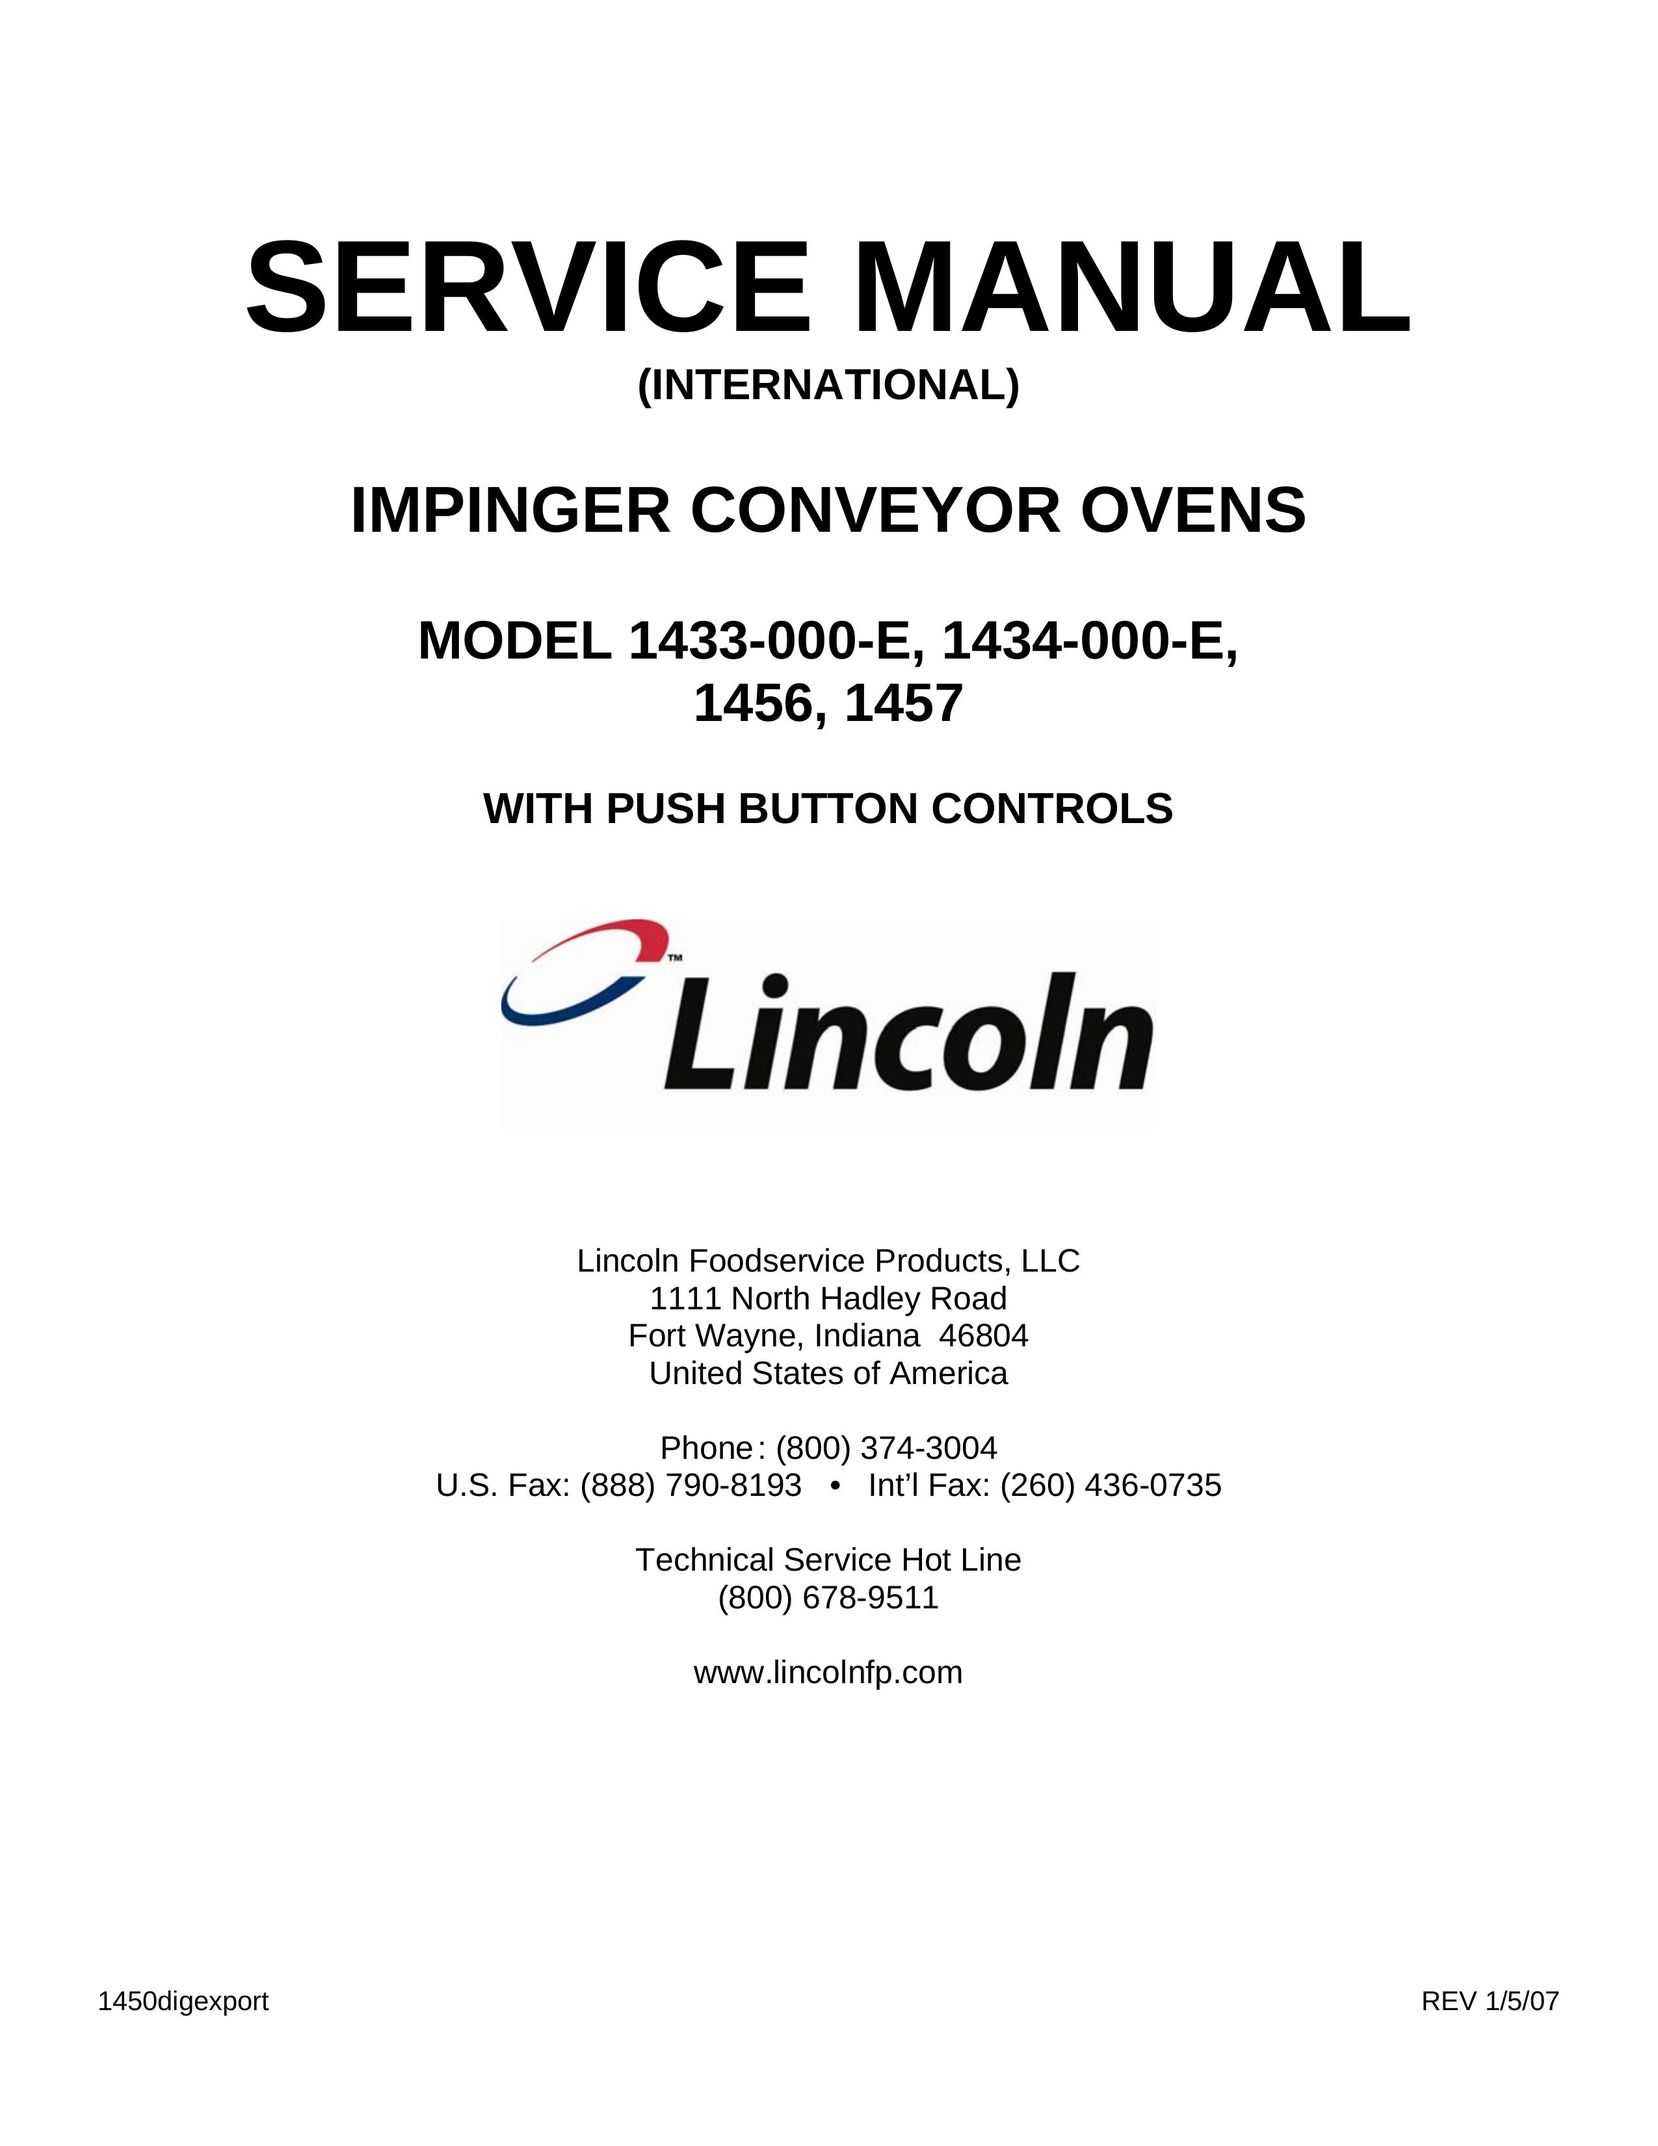 Lincoln 1457 Oven User Manual